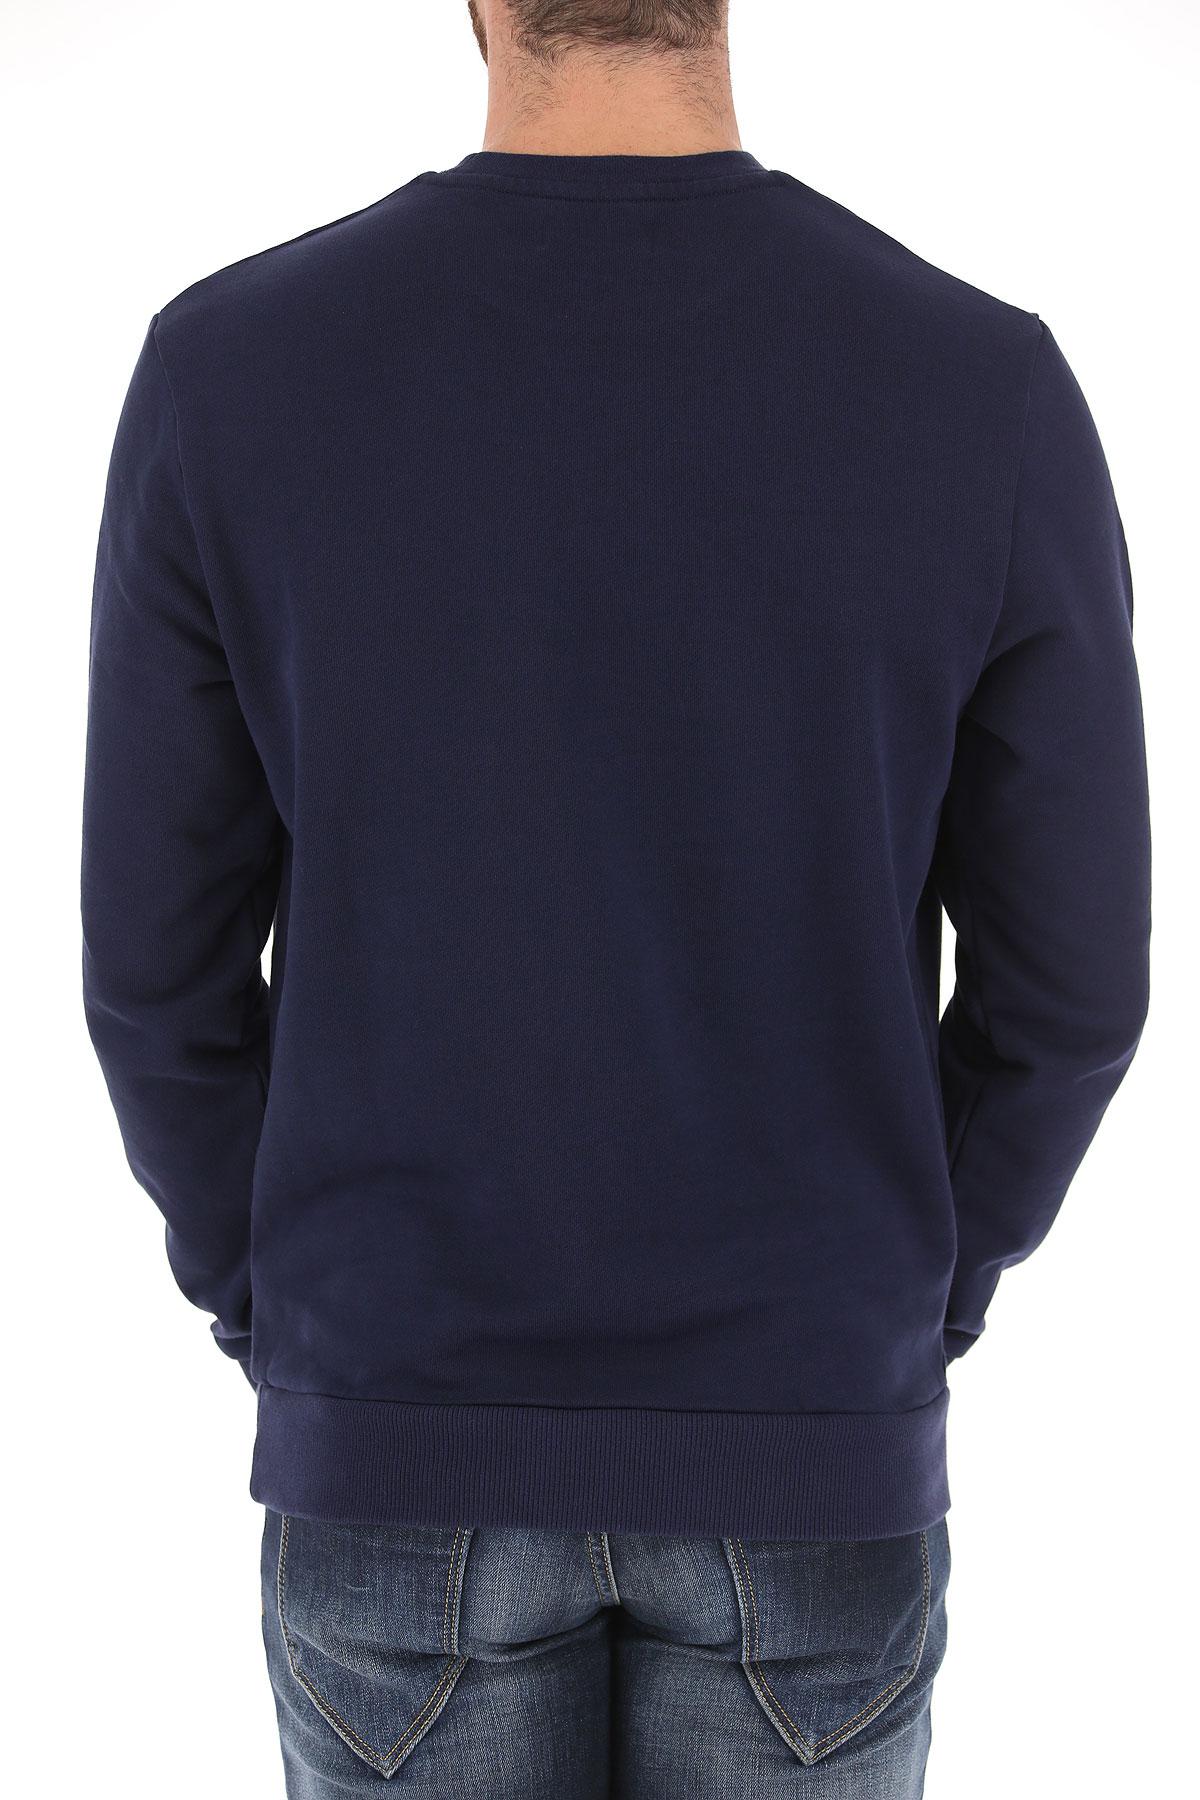 Fred Perry Sweatshirt For Men On Sale in Blue for Men - Lyst